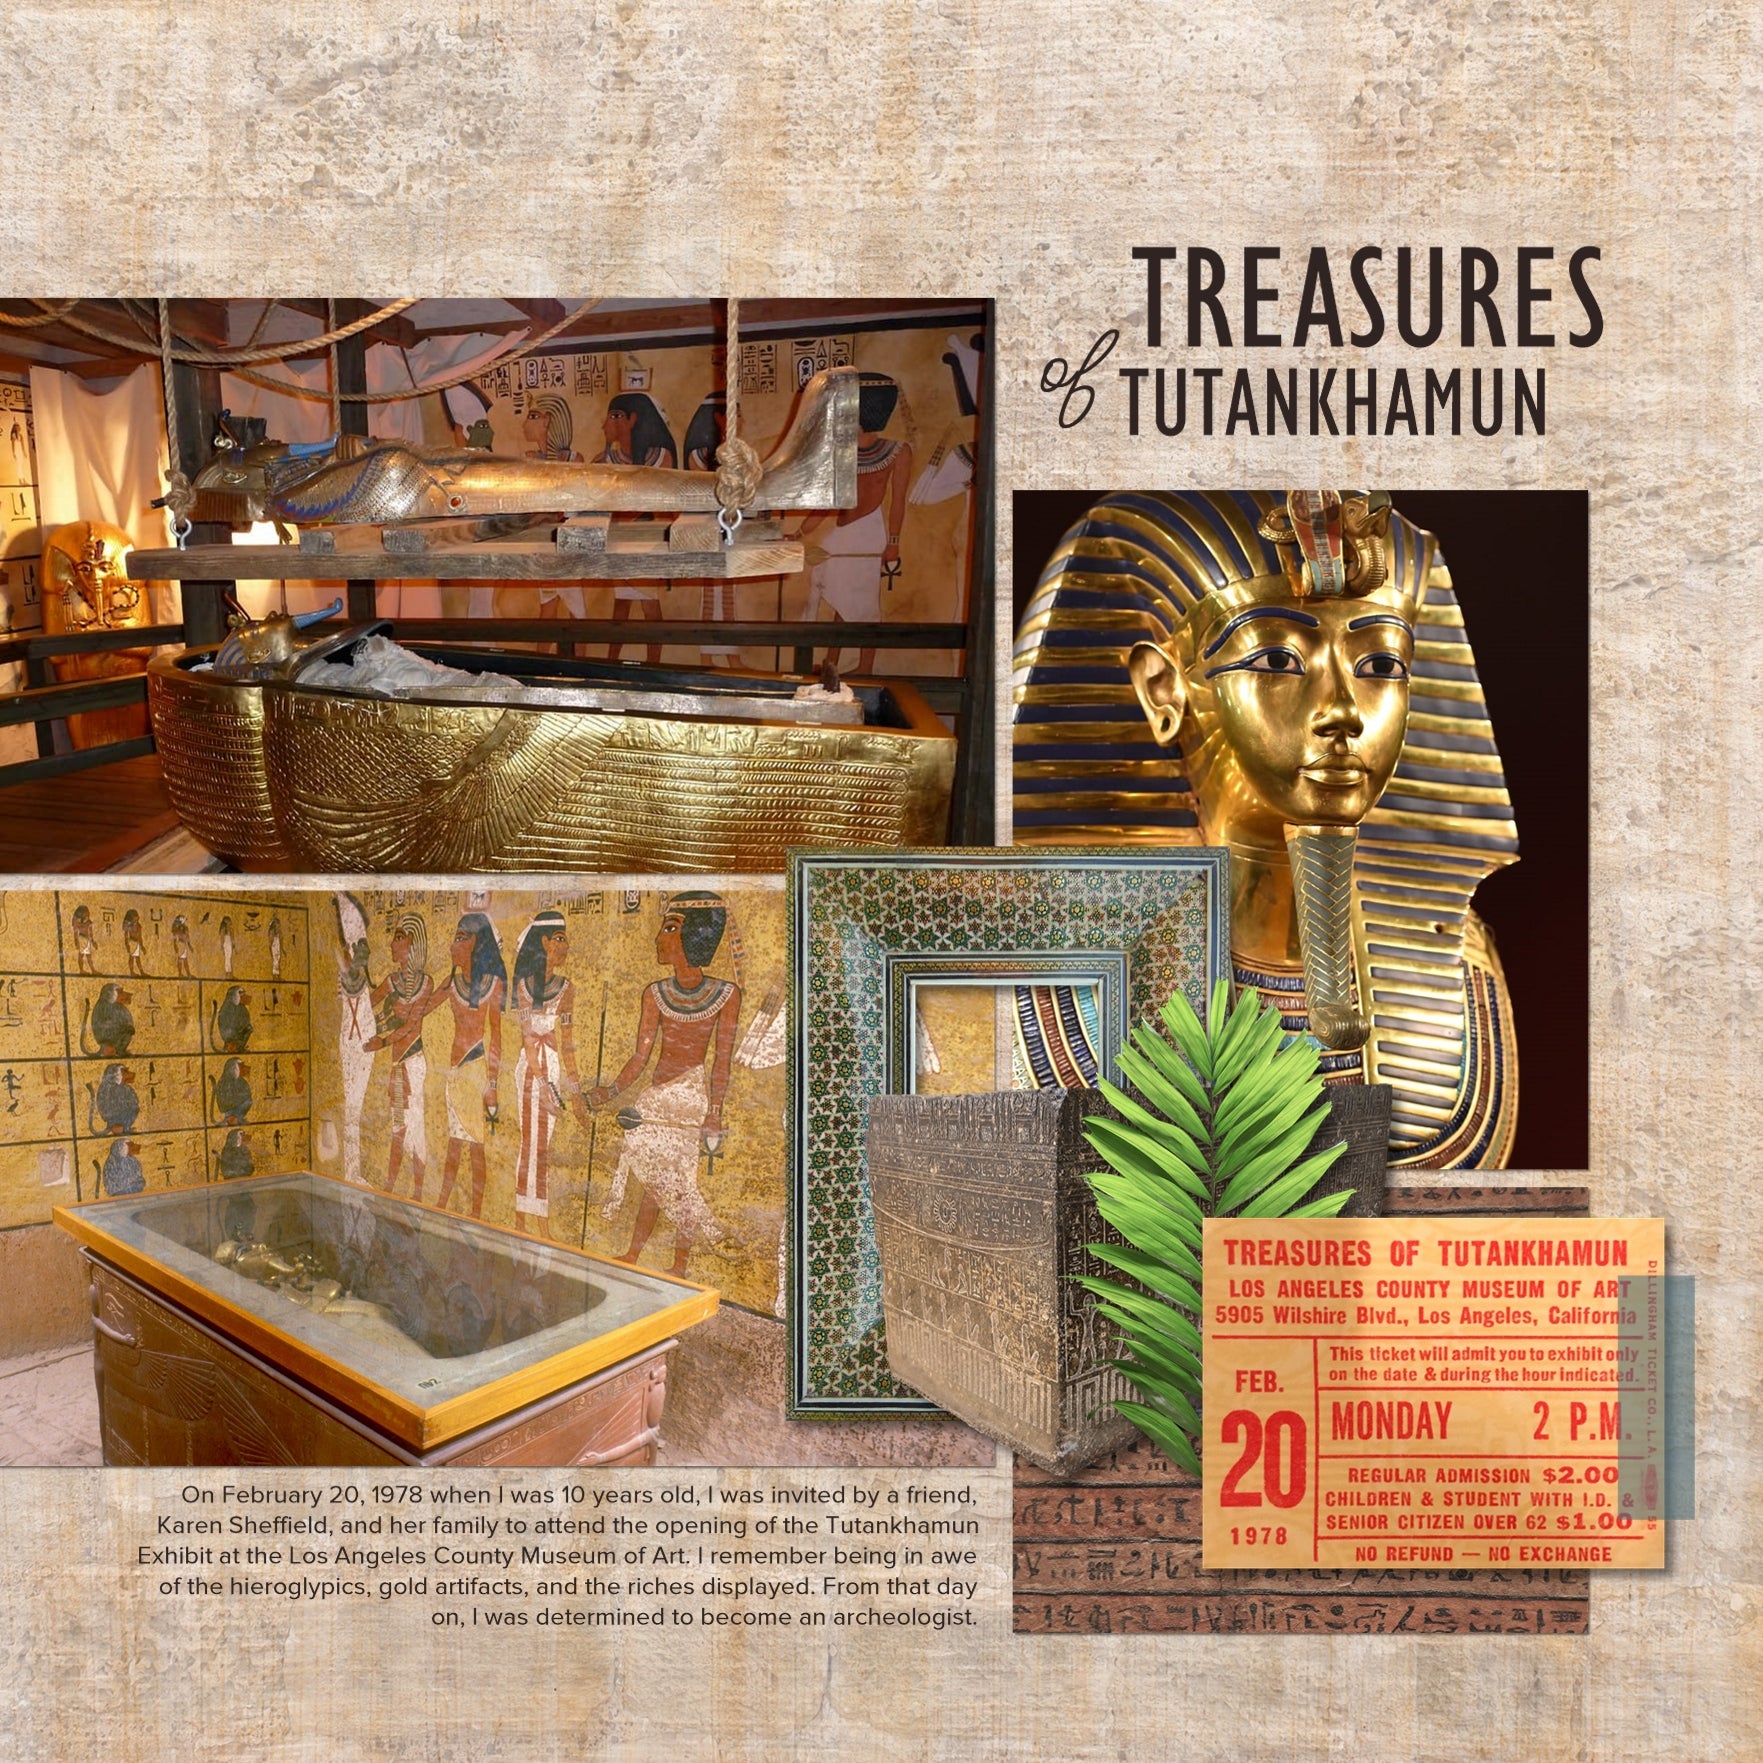 Adventure and explore through Egypt with this beautiful and realistic Egyptian travel digital scrapbooking bundle by Lucky Girl Creative. Bring your vacation pages to Egypt to life!